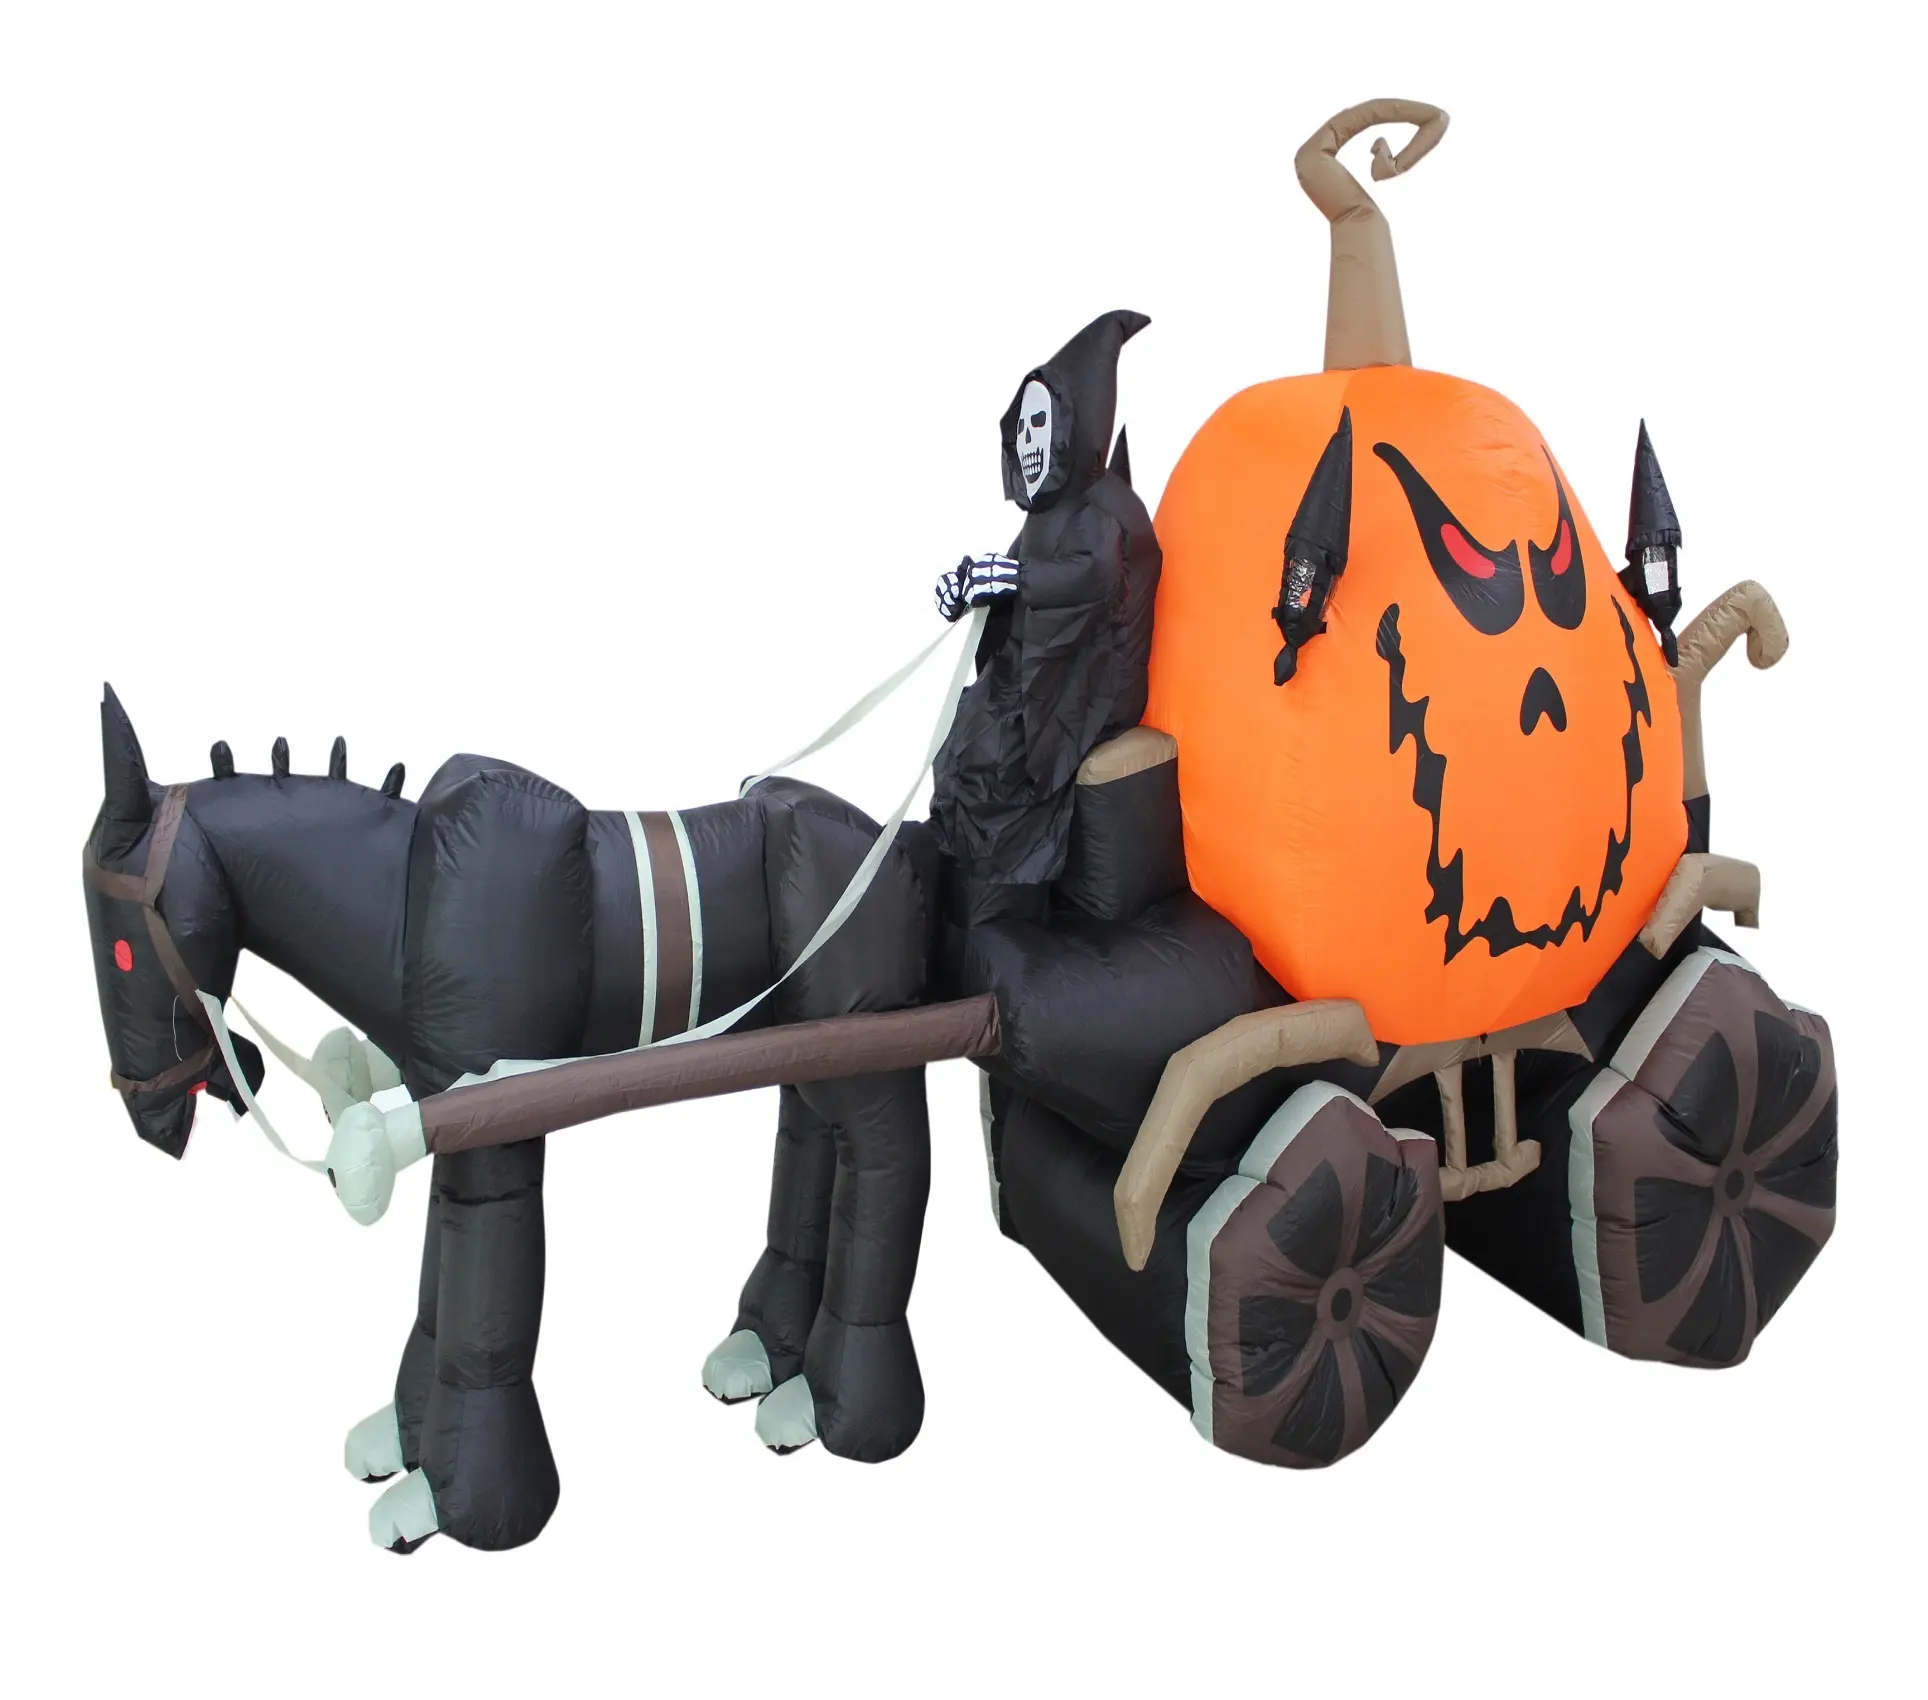 350cm long inflatable ghost rides a pumpkin cart with lights for halloween decoration giant Halloween decoration inflatable